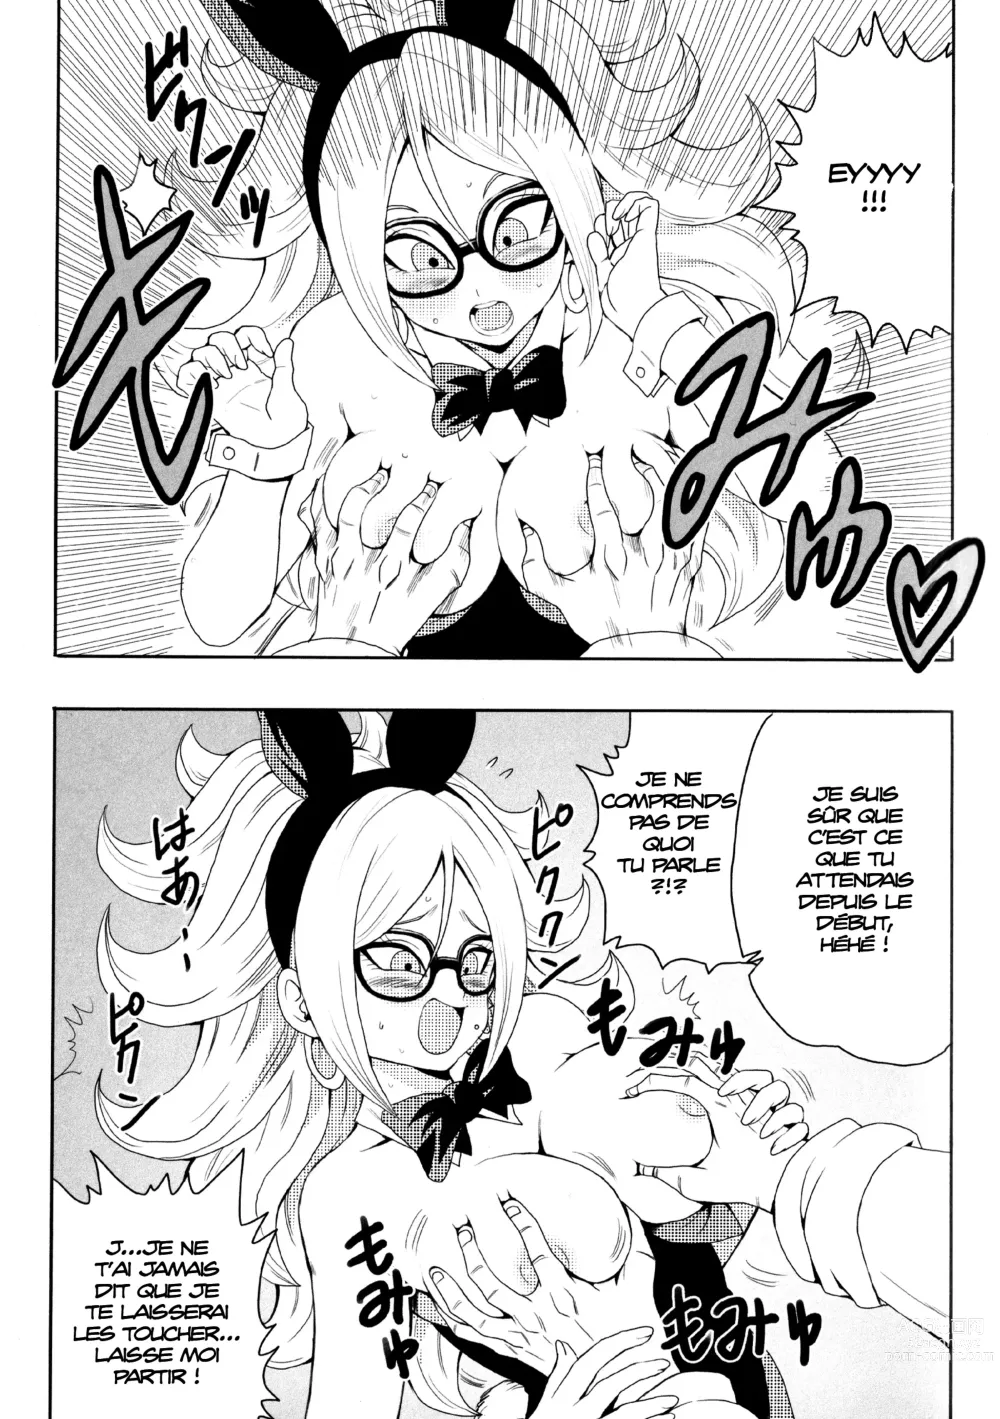 Page 35 of doujinshi Episode of Bulma - Android 21 Version